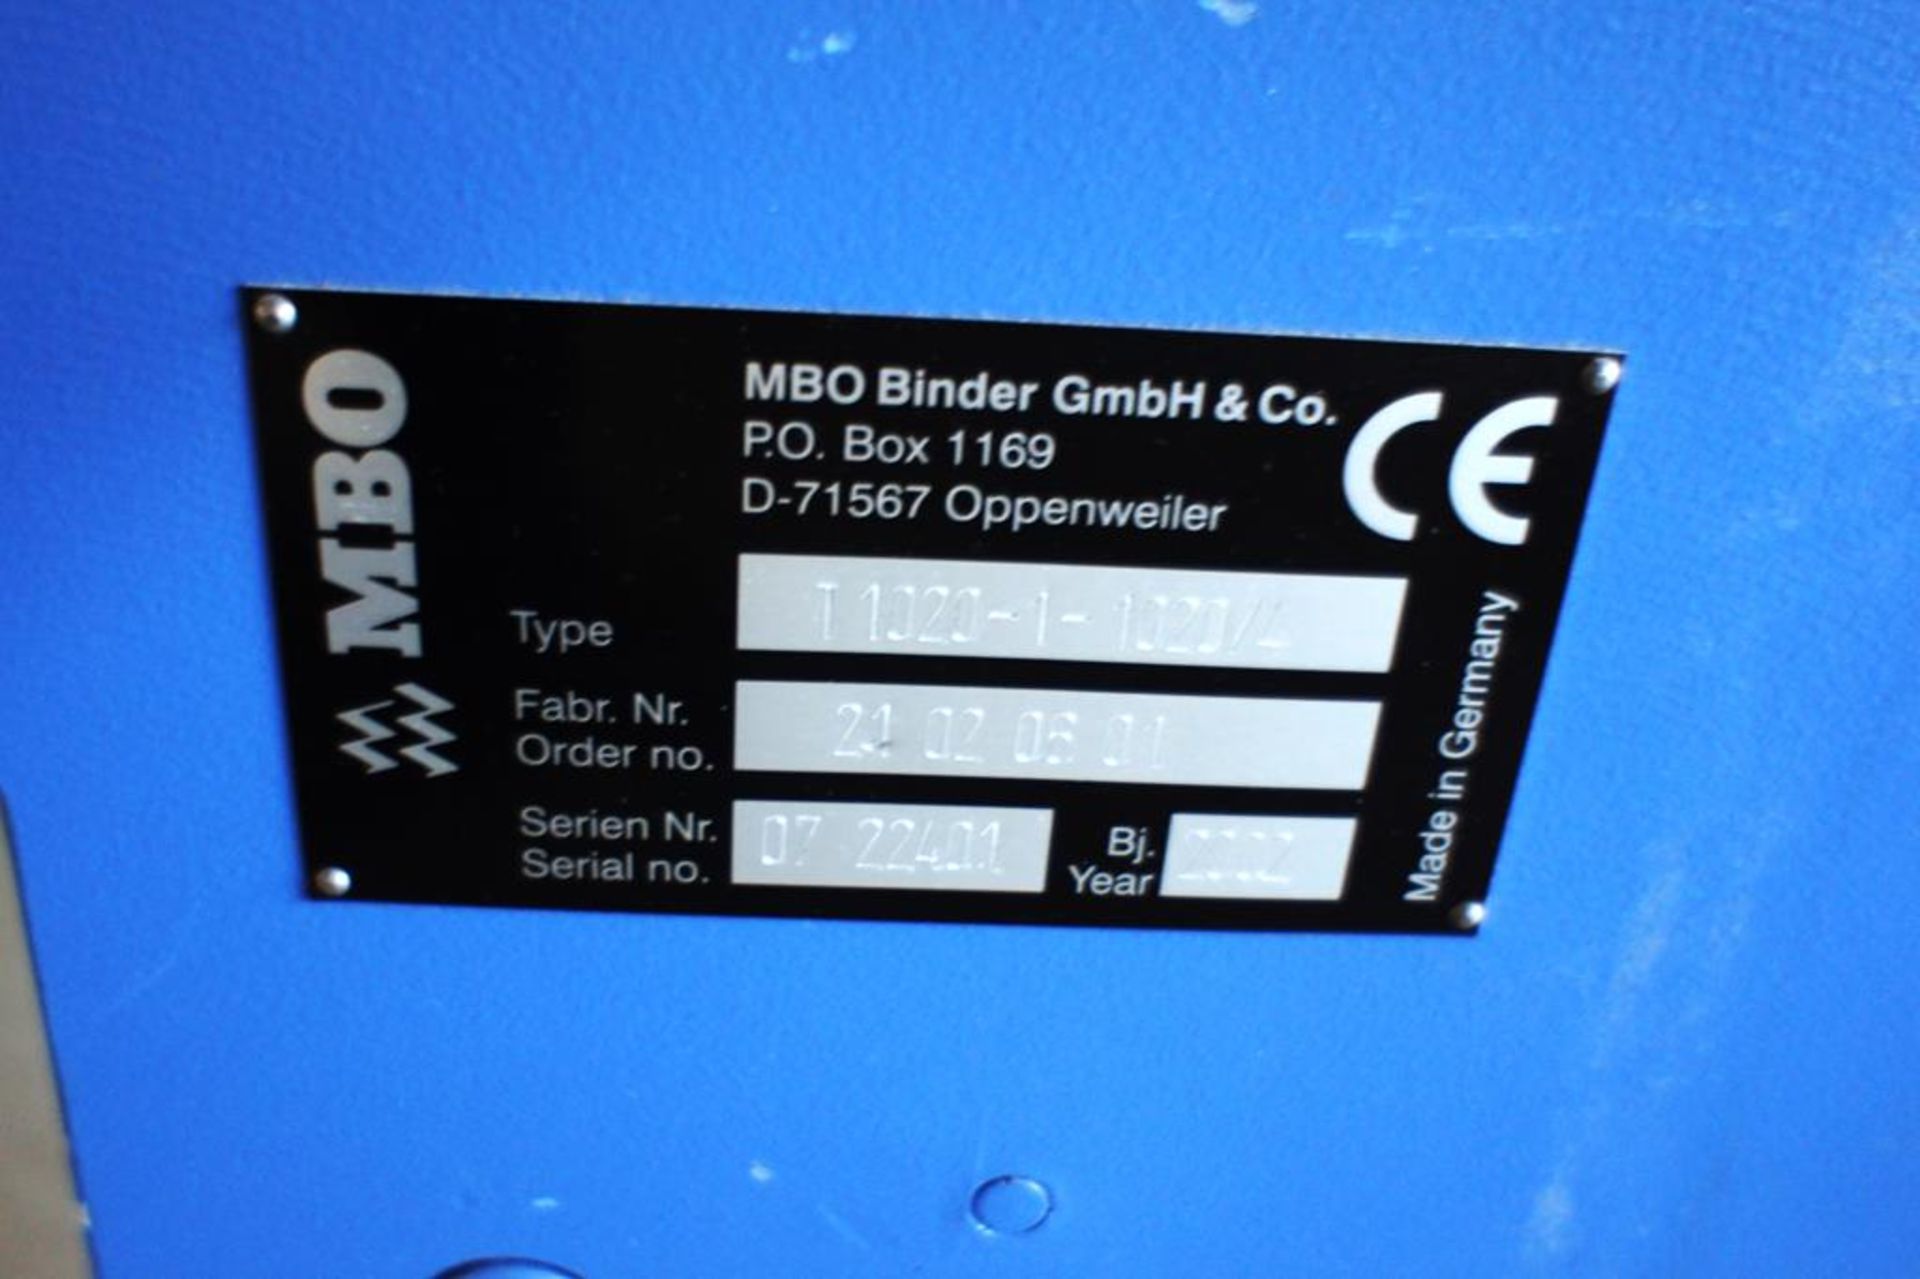 * MBO Perfection type T1020-1-1020/4 folder, fabrication no. 21.02.06.01, serial number 07 22401 ( - Image 34 of 92